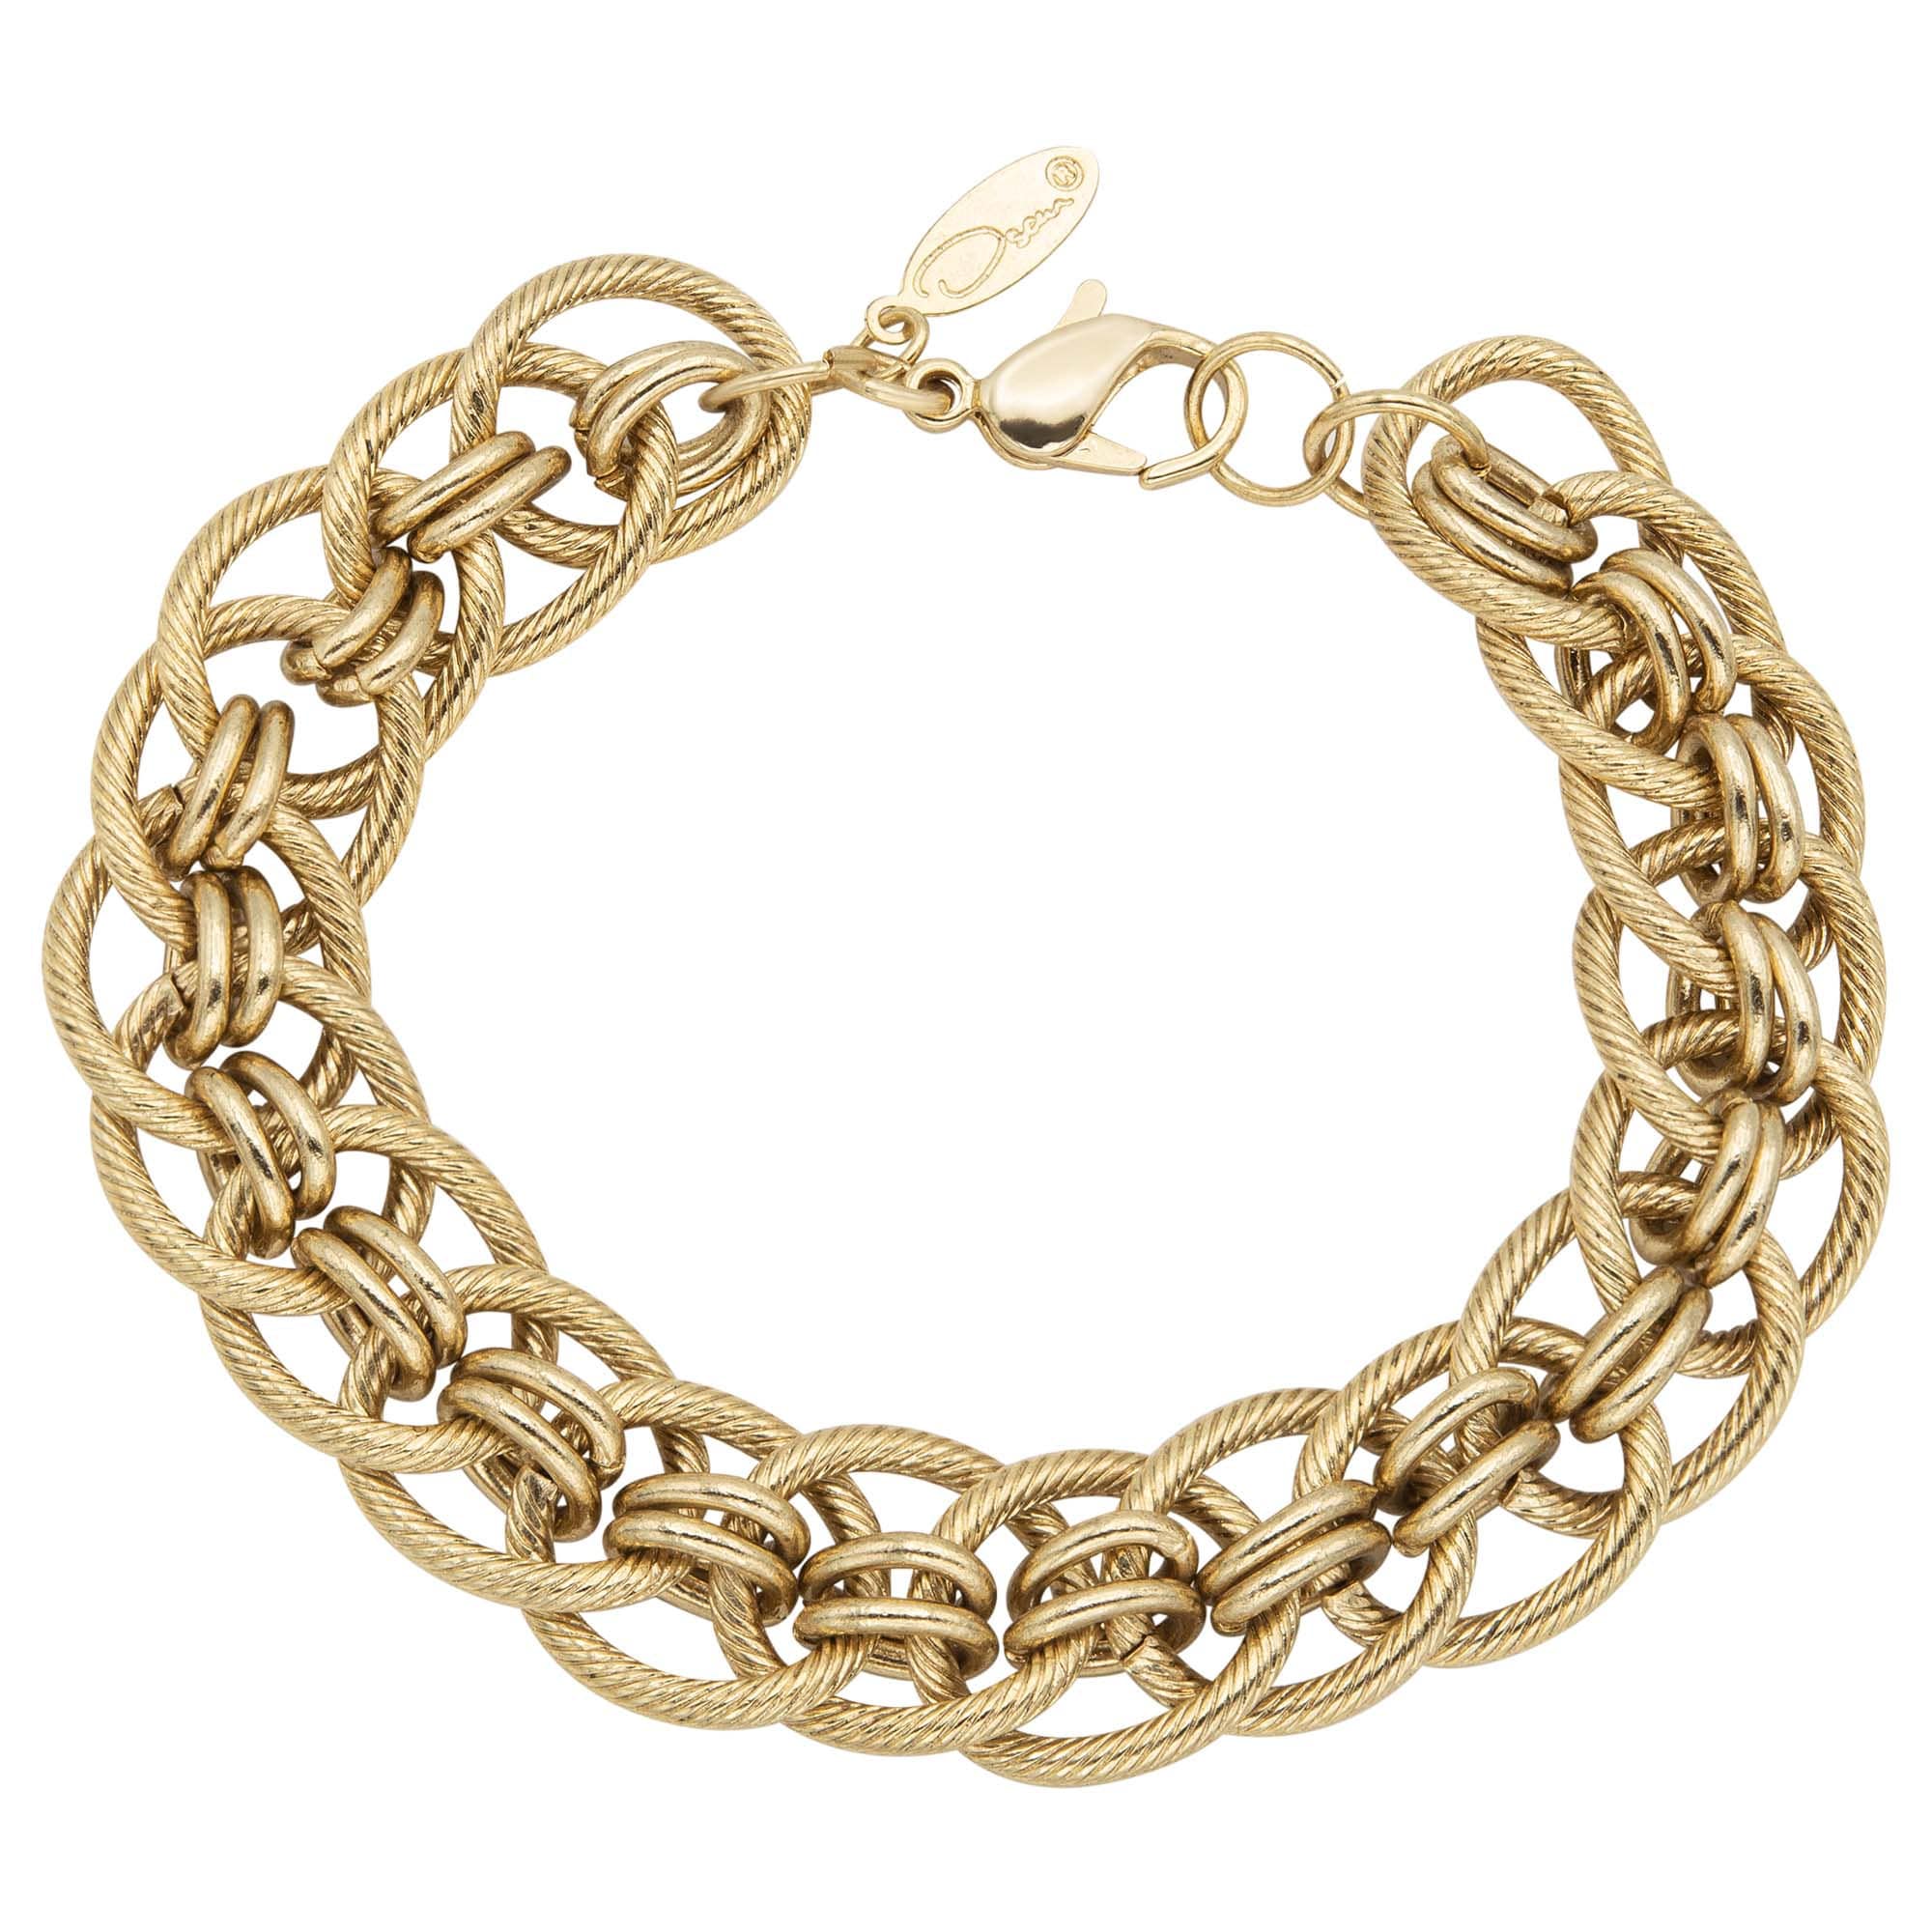 Herco 14K Polished Solid 8.75mm Half Round Miami Cuban Link 8 Inch Chain  Bracelet - Quality Gold